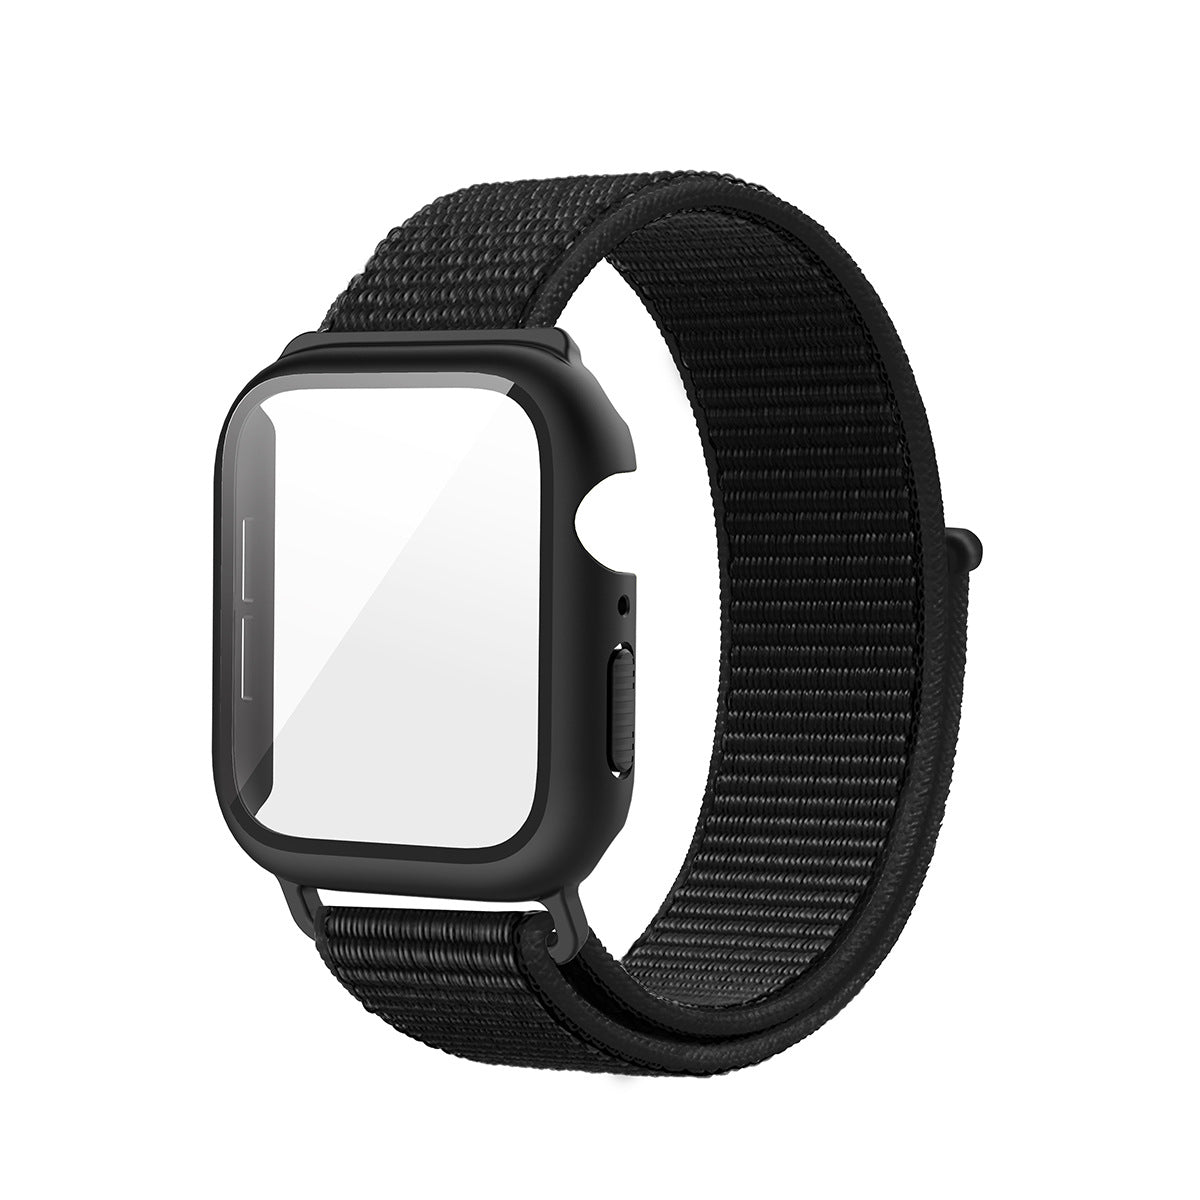 Nylon All-in-one protective case strap for iwatch W24GAWS8701